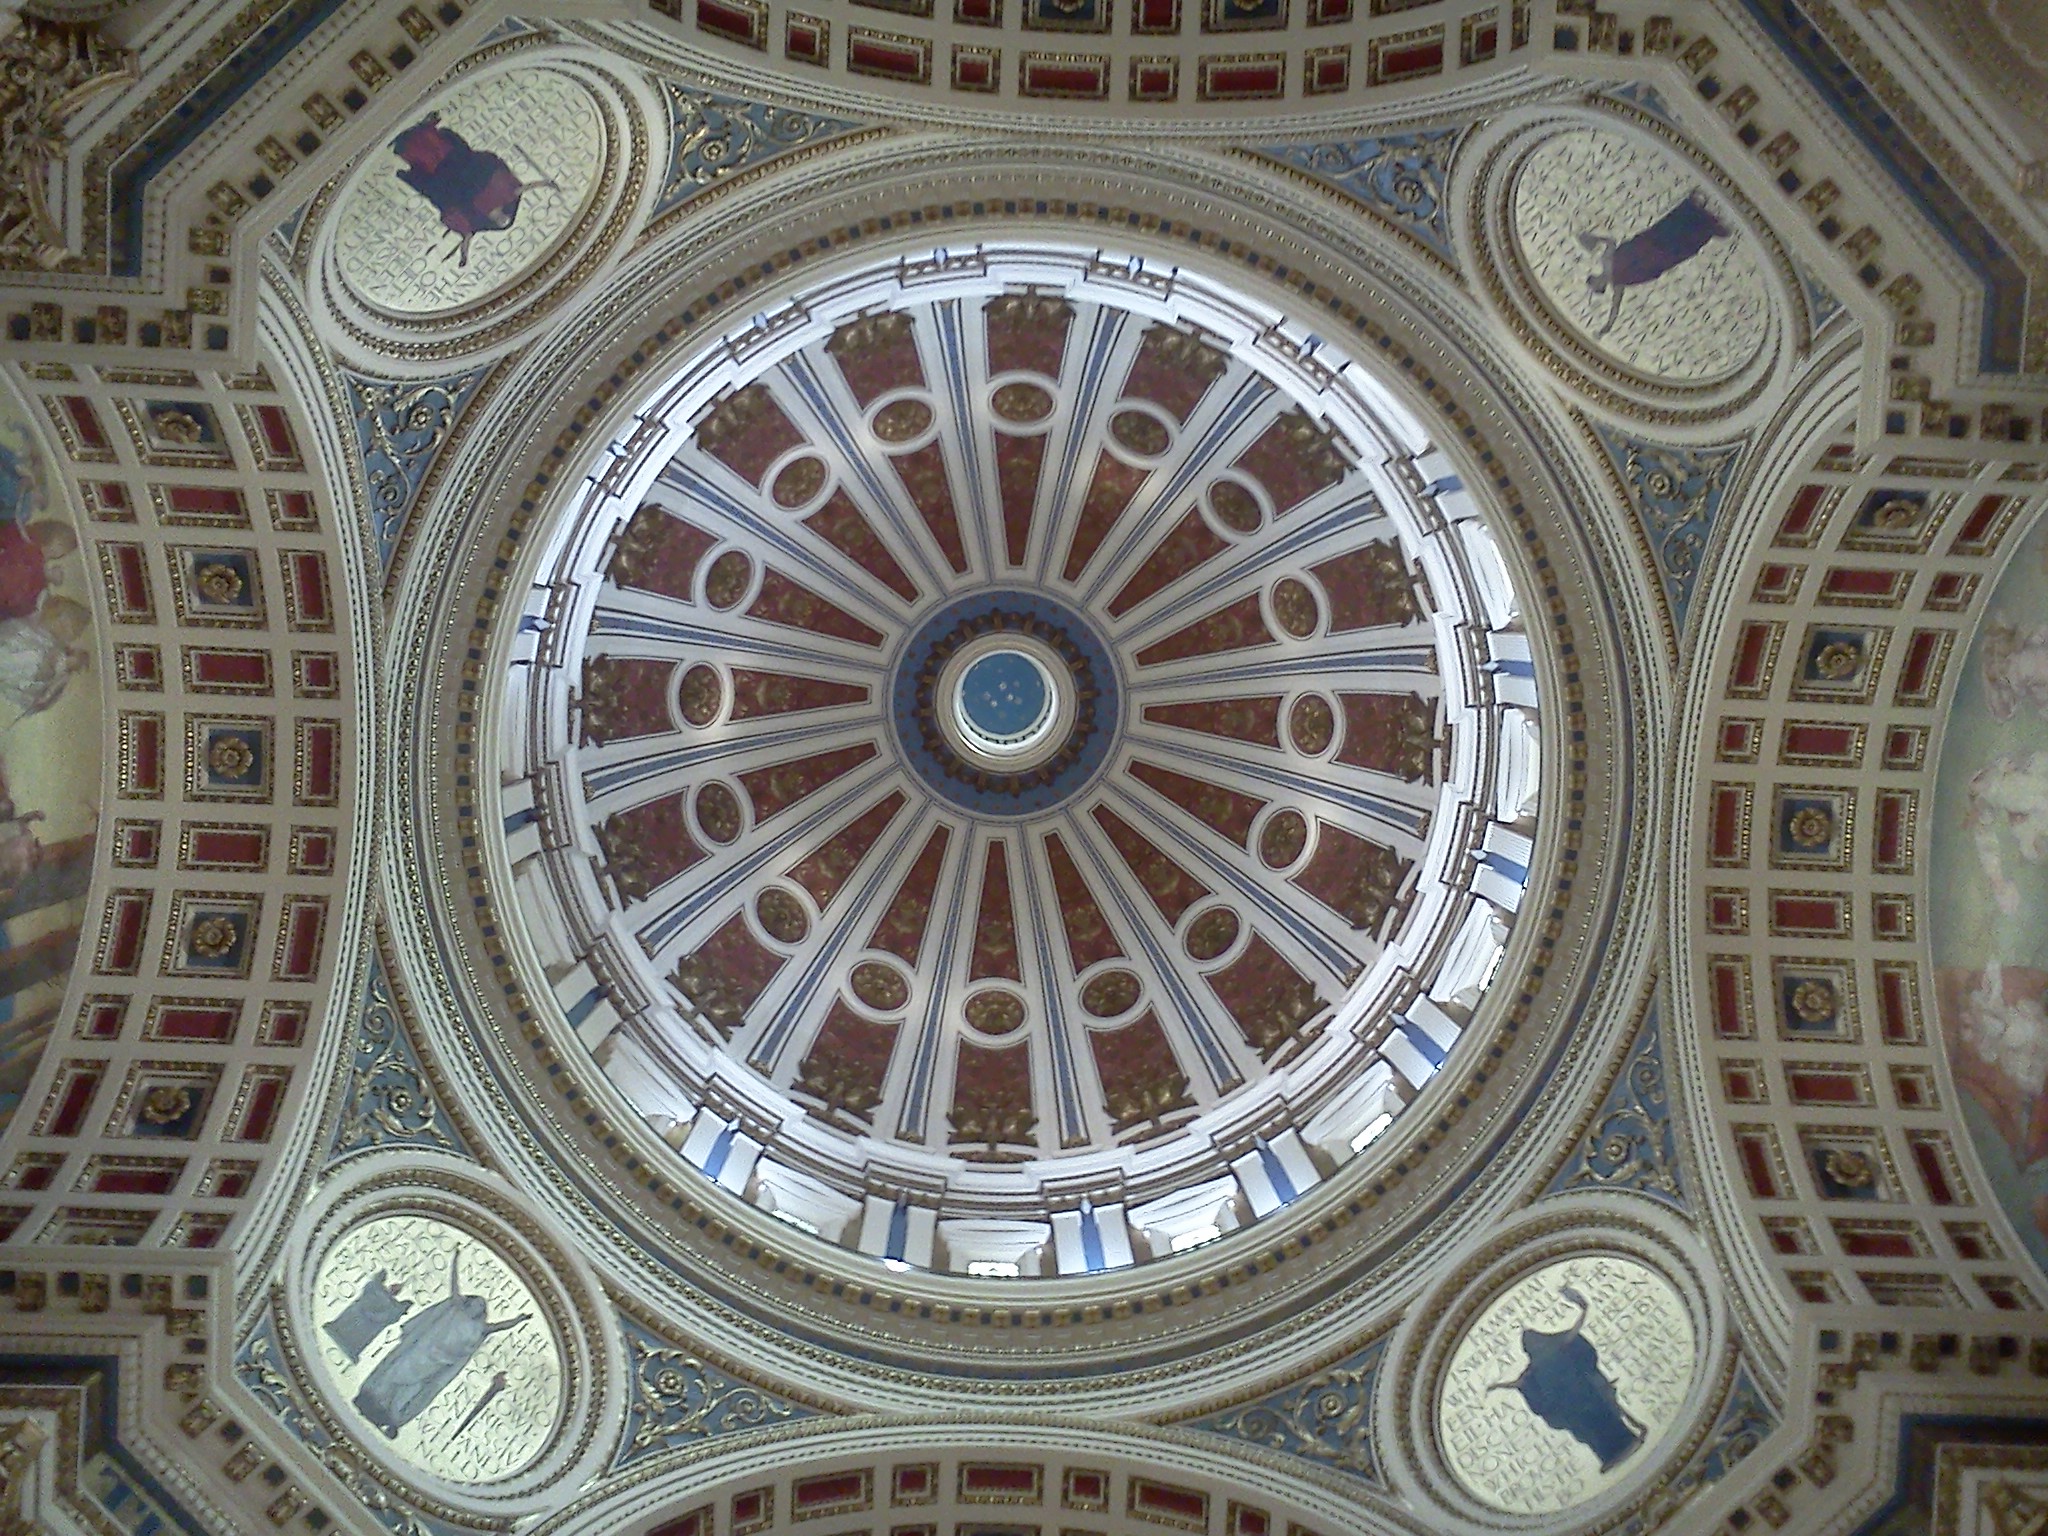 Under the Capitol Dome